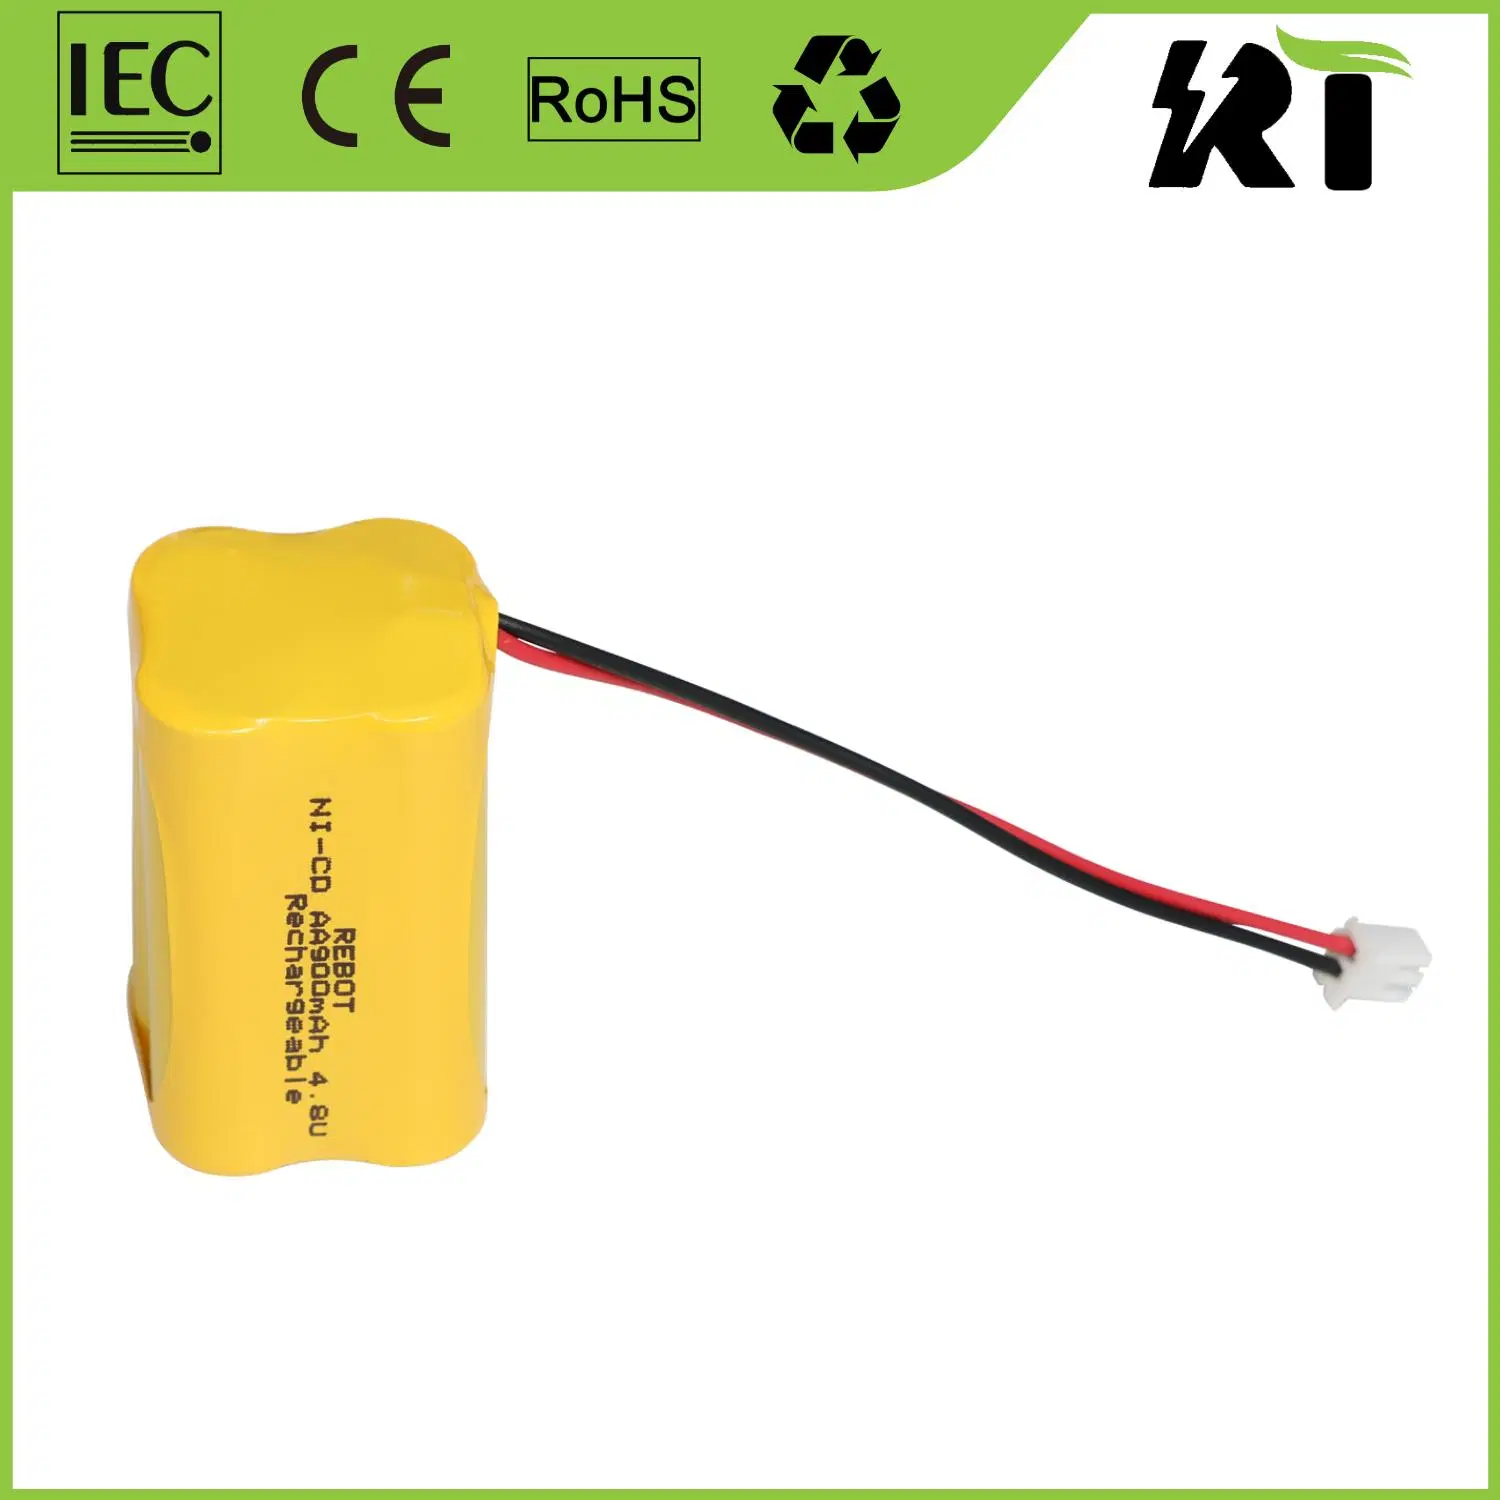 1.2V AAA NiCd 400mAh Rechargeable NiCd Battery for Wireless Mouse, Camera